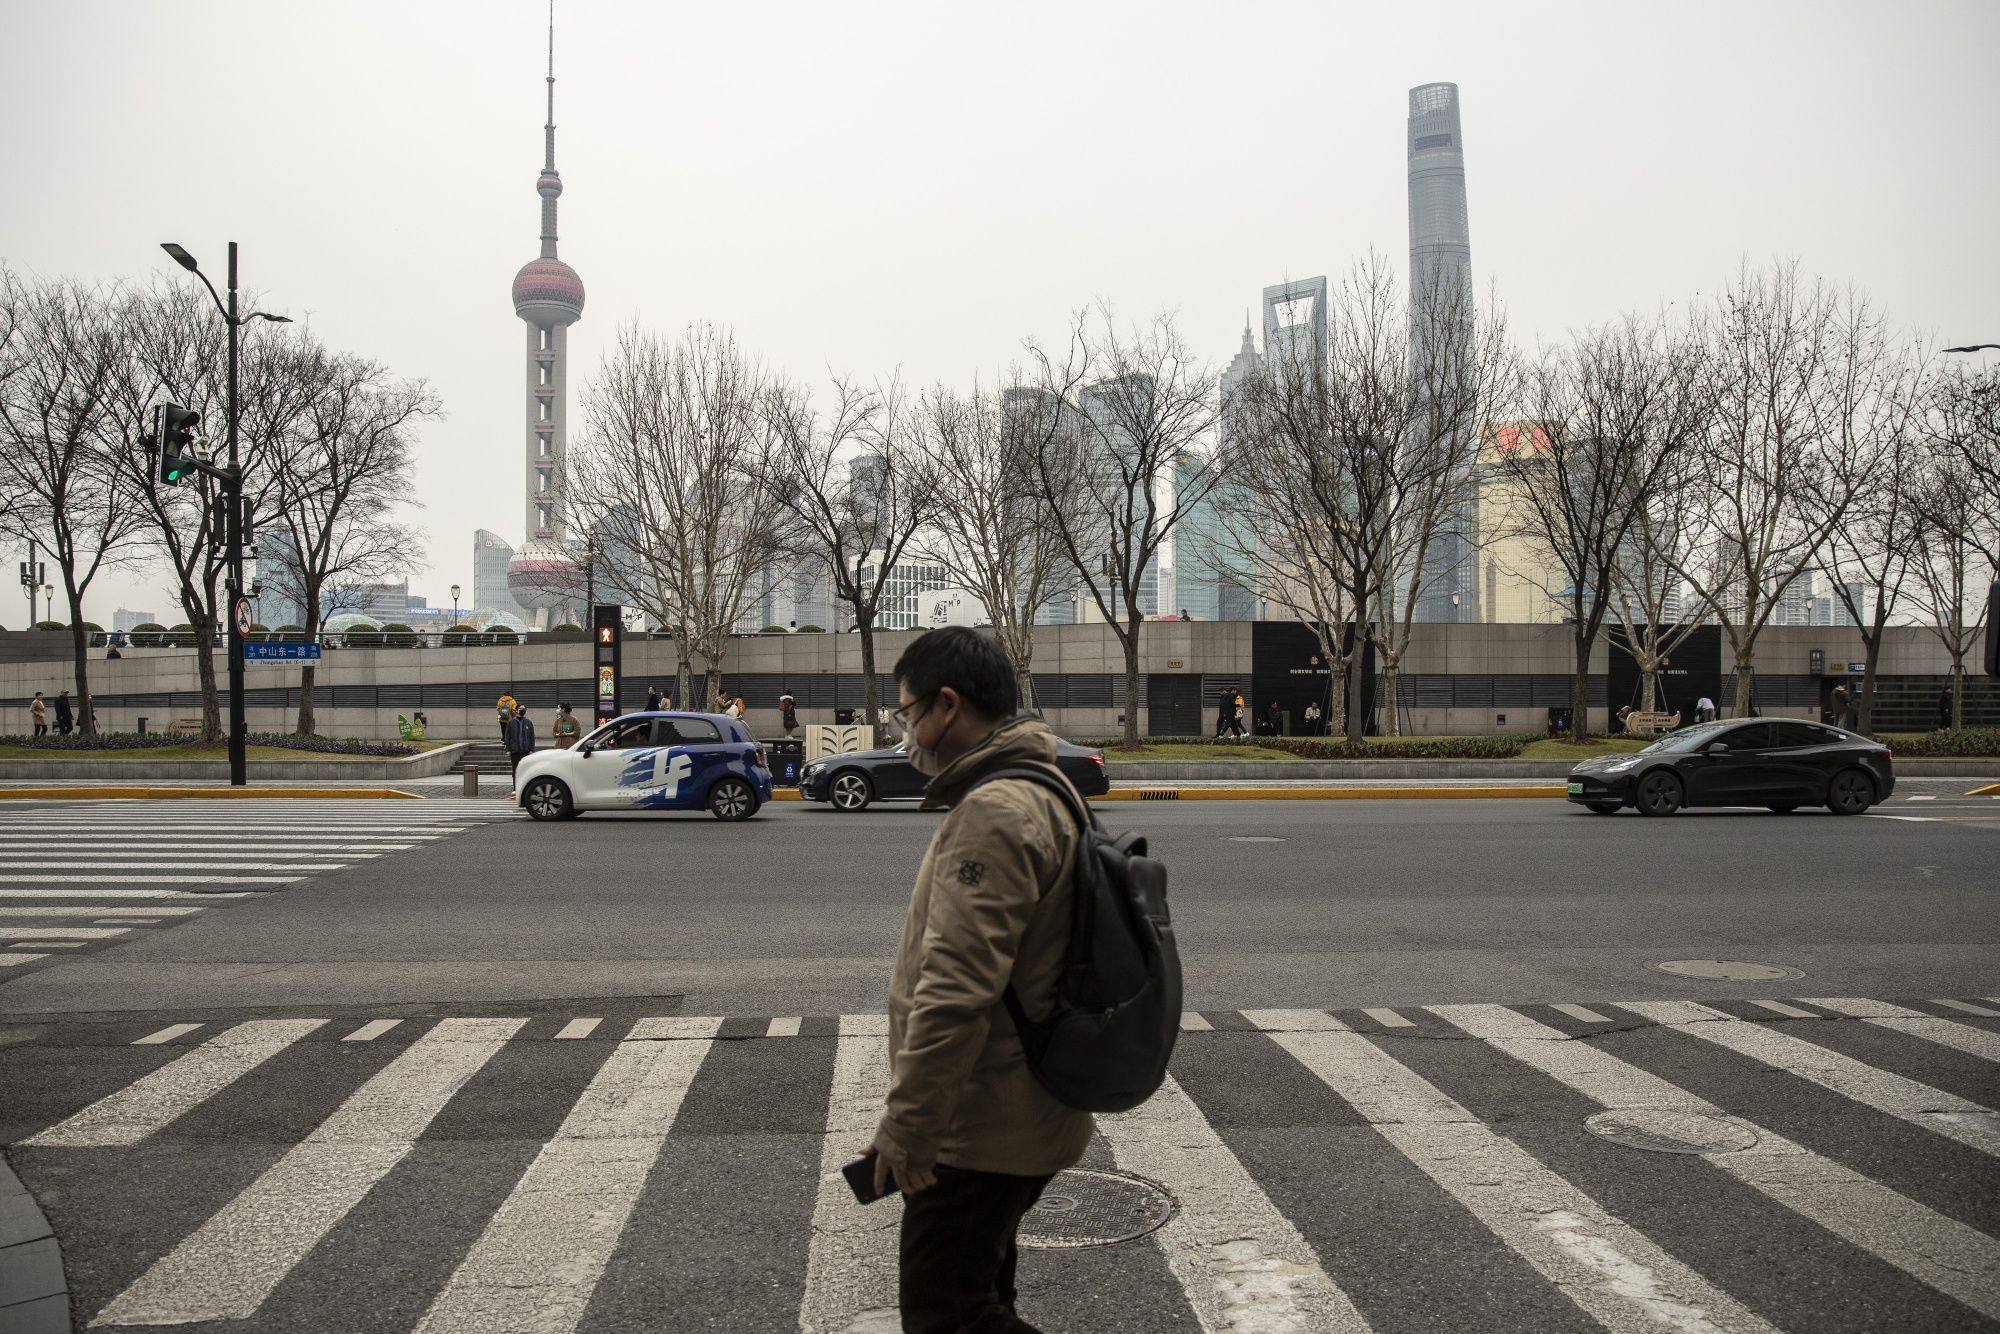 A pedestrian crosses a street near the Bund across from buildings in Pudong’s Lujiazui financial district in Shanghai, on February 28, 2023. Photo: Bloomberg